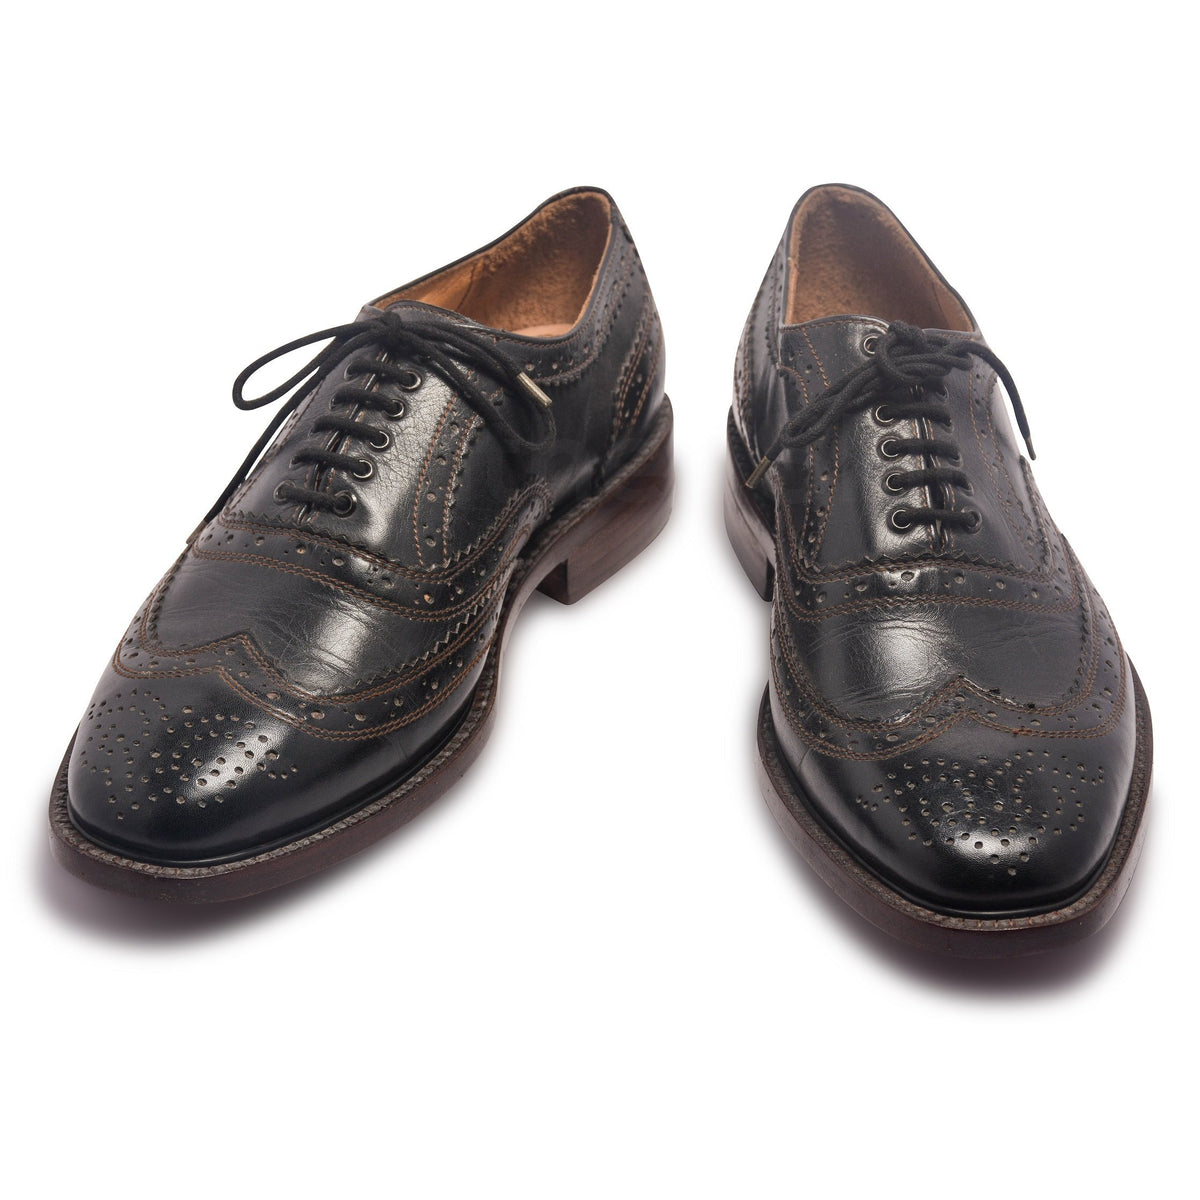 Mens Black Oxford Wingtip Brogue Shoes with Brown stitching - Leather ...